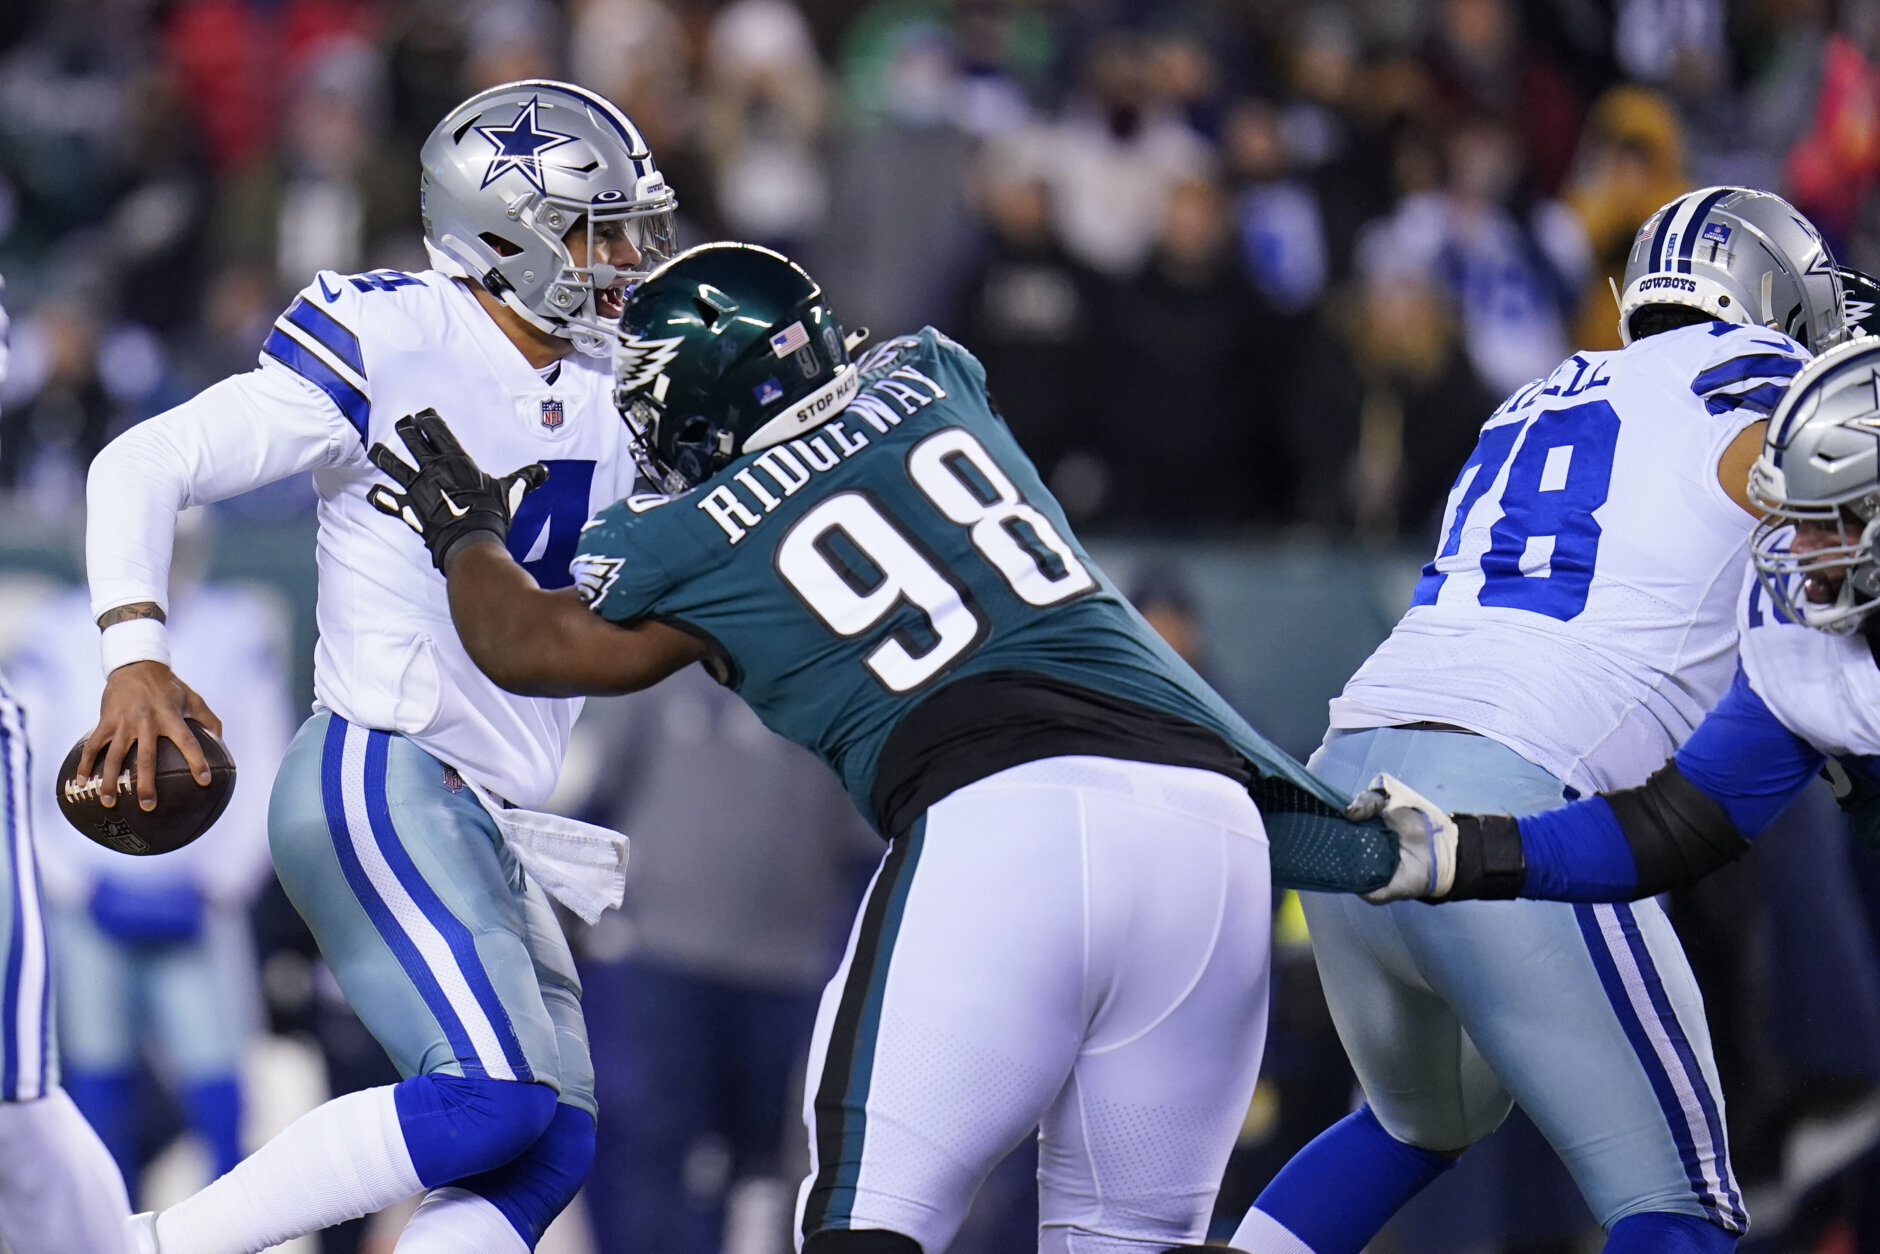 <p><em><strong>Cowboys 51</strong></em><br />
<em><strong>Eagles 26</strong></em></p>
<p>Given Philly didn&#8217;t play many of their starters, Dallas winning this game in this fashion isn&#8217;t nearly as impressive as the final stats imply. But give it up for Dak Prescott having a record-setting comeback season and the Cowboys&#8217; <a href="https://profootballtalk.nbcsports.com/2022/01/08/cowboys-have-had-22-players-score-a-touchdown-this-season-setting-an-nfl-record/" target="_blank" rel="noopener">unprecedented spreading of the wealth</a> to seal up a favorable matchup in a home playoff game.</p>
<p>Philadelphia is almost certain to go one-and-done in the playoffs but 2021 was a fine first step for the Nick Sirianni era. A fine performance on the road against the defending champs would be a compelling case for Jalen Hurts to remain QB1 in Philly.</p>
